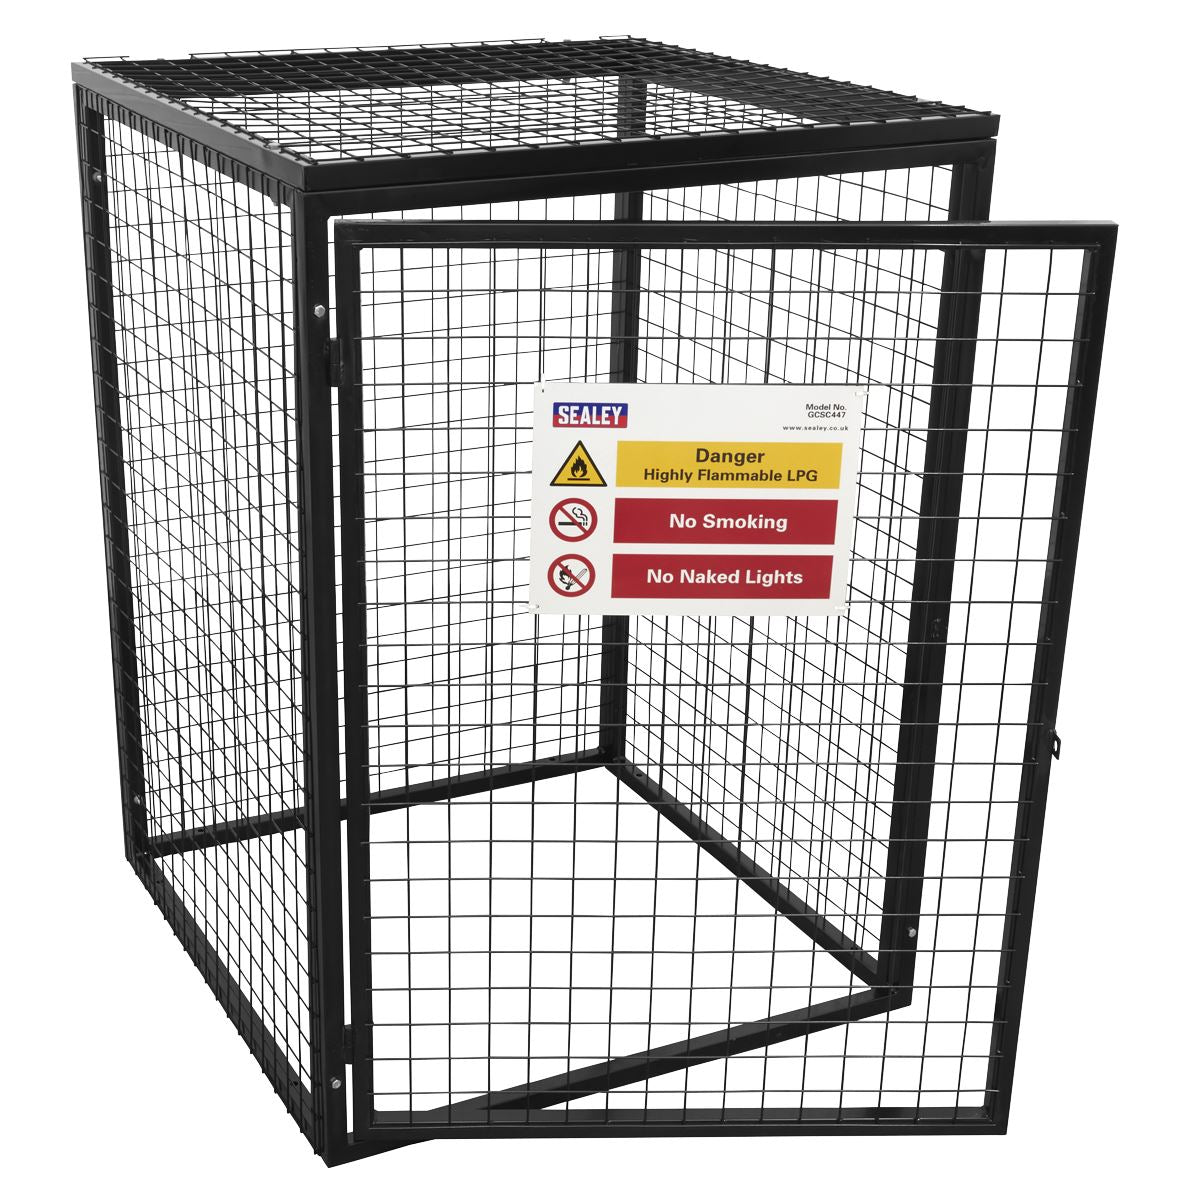 Sealey Safety Cage - 4 x 47kg Gas Cylinders GCSC447